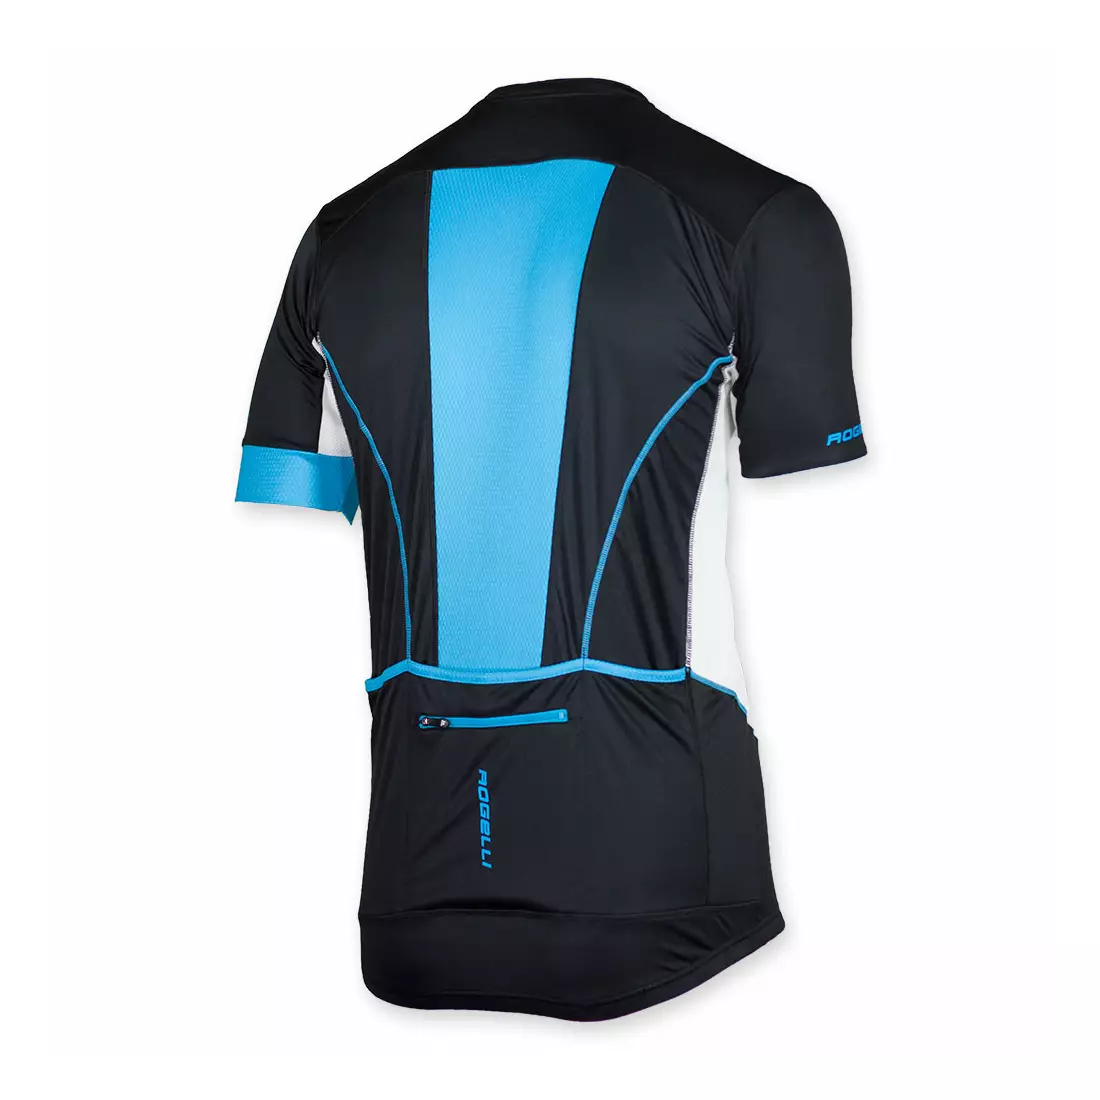 ROGELLI PONZA men's cycling jersey black and blue